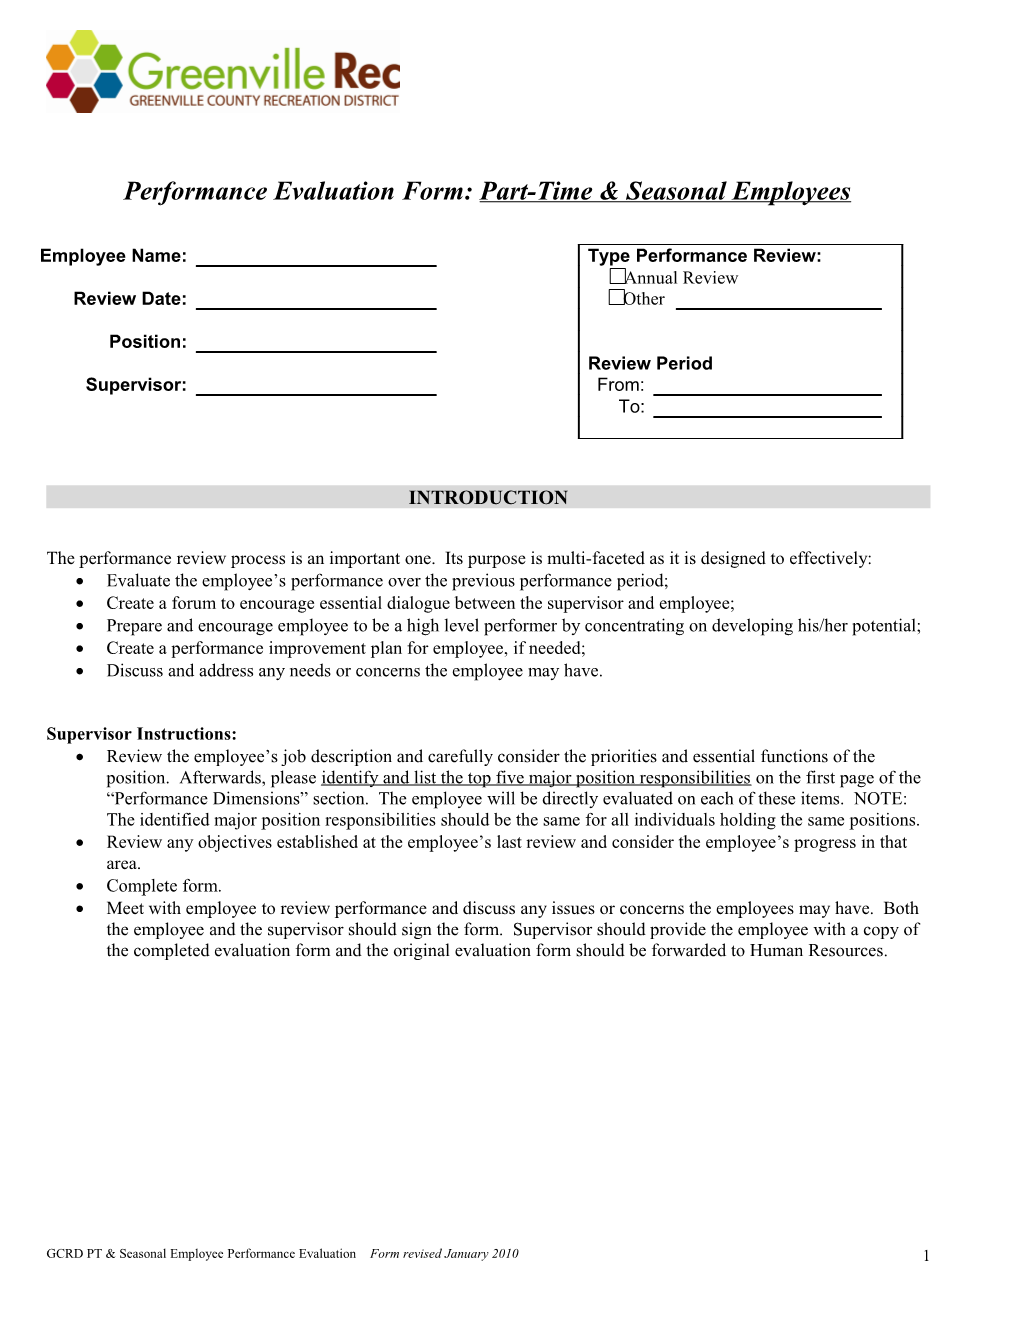 Performance Evaluation Form: Part-Time & Seasonal Employees